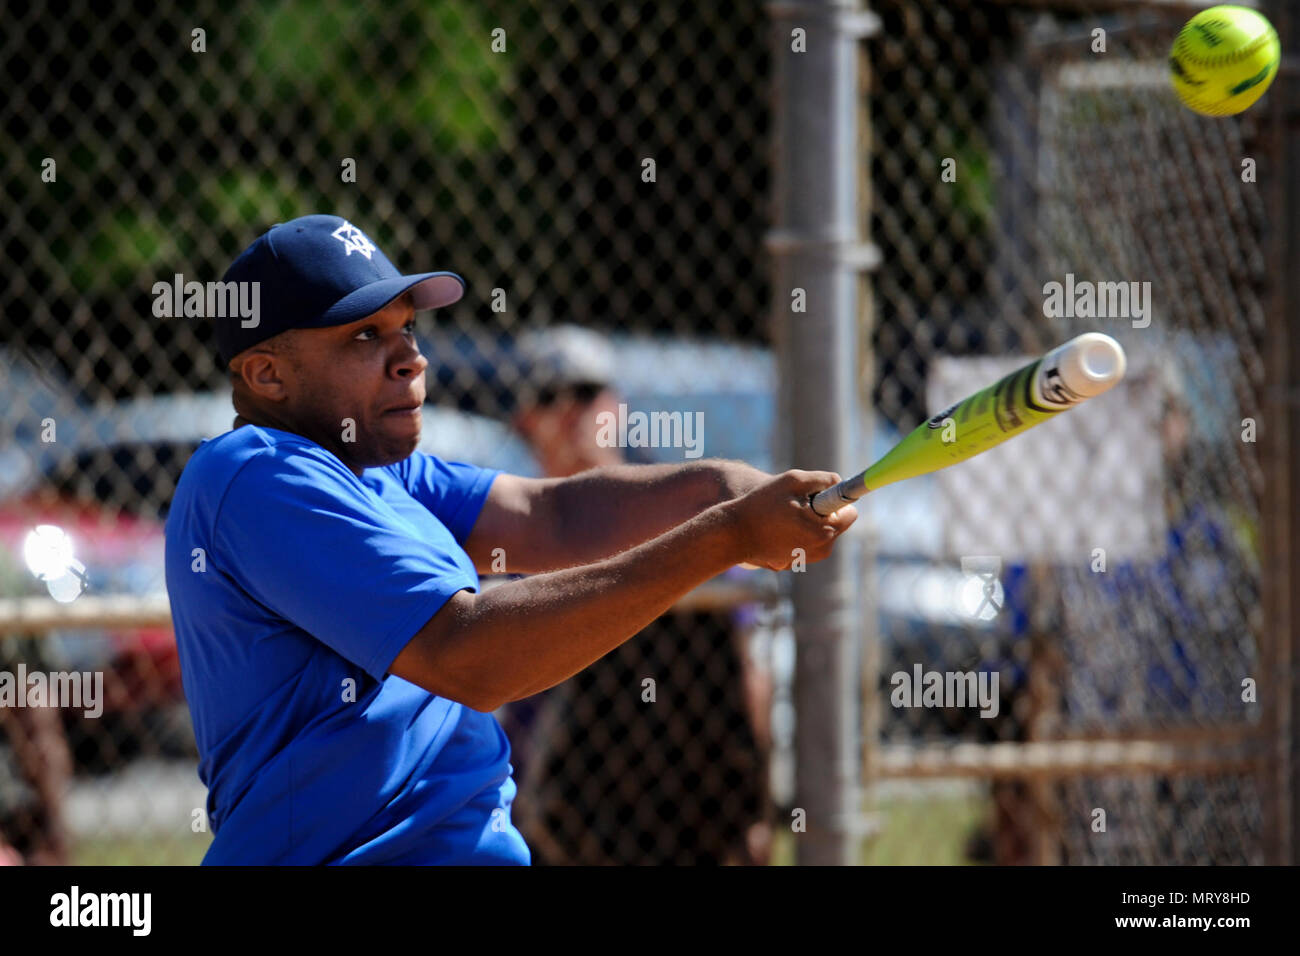 Armed Forces Softball Tournament High Resolution Stock Photography And Images Alamy